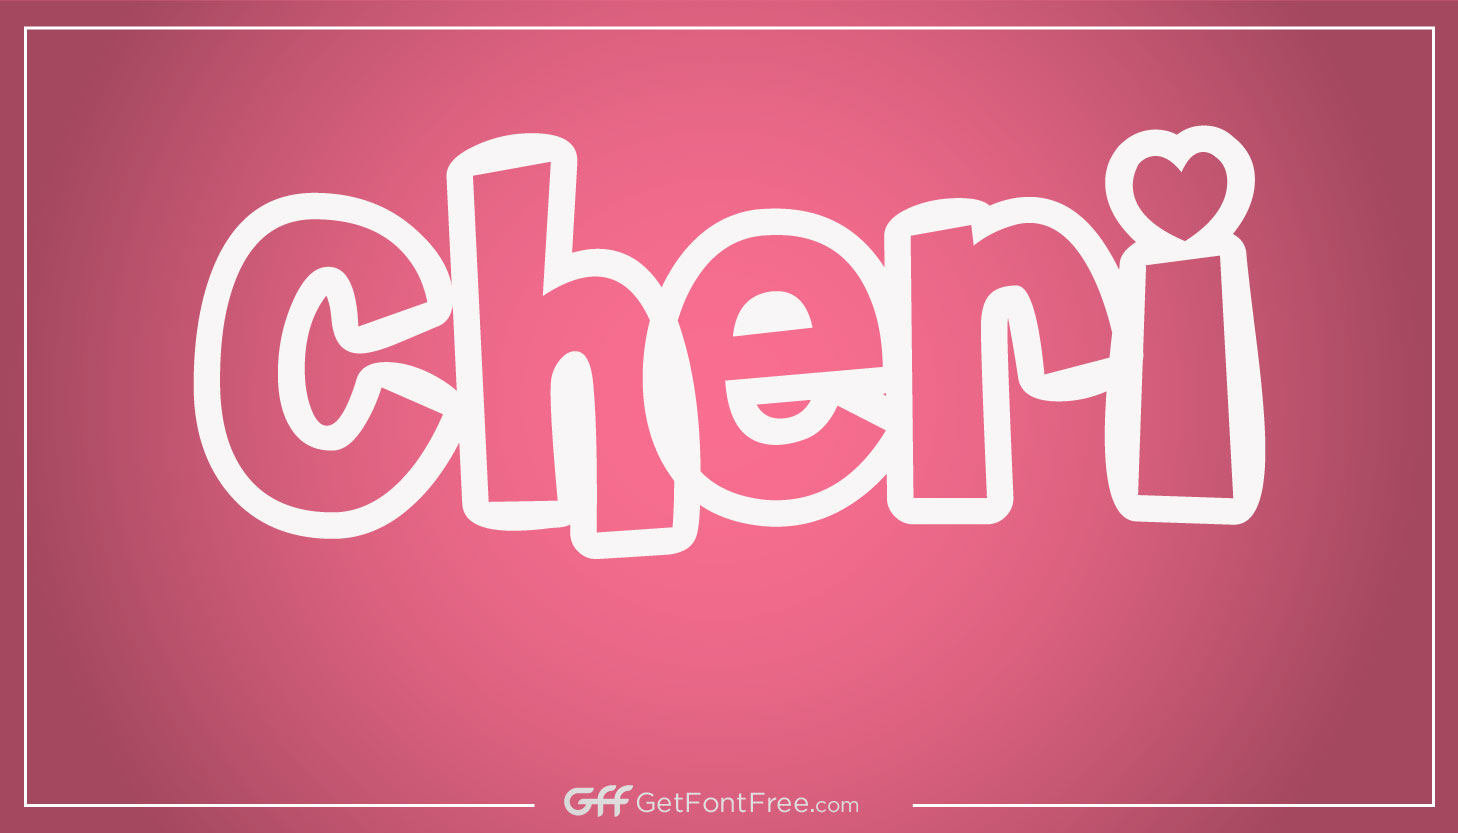 Cheri Font is a playful and whimsical script font that was created by French typeface designer, Gert Wiescher, and released in 1995. The font has a distinctive handwritten style, with quirky curves and exaggerated descenders that give it a unique personality. Cheri font was inspired by the handwriting of a young girl named Cherie, who was a family friend of the designer.